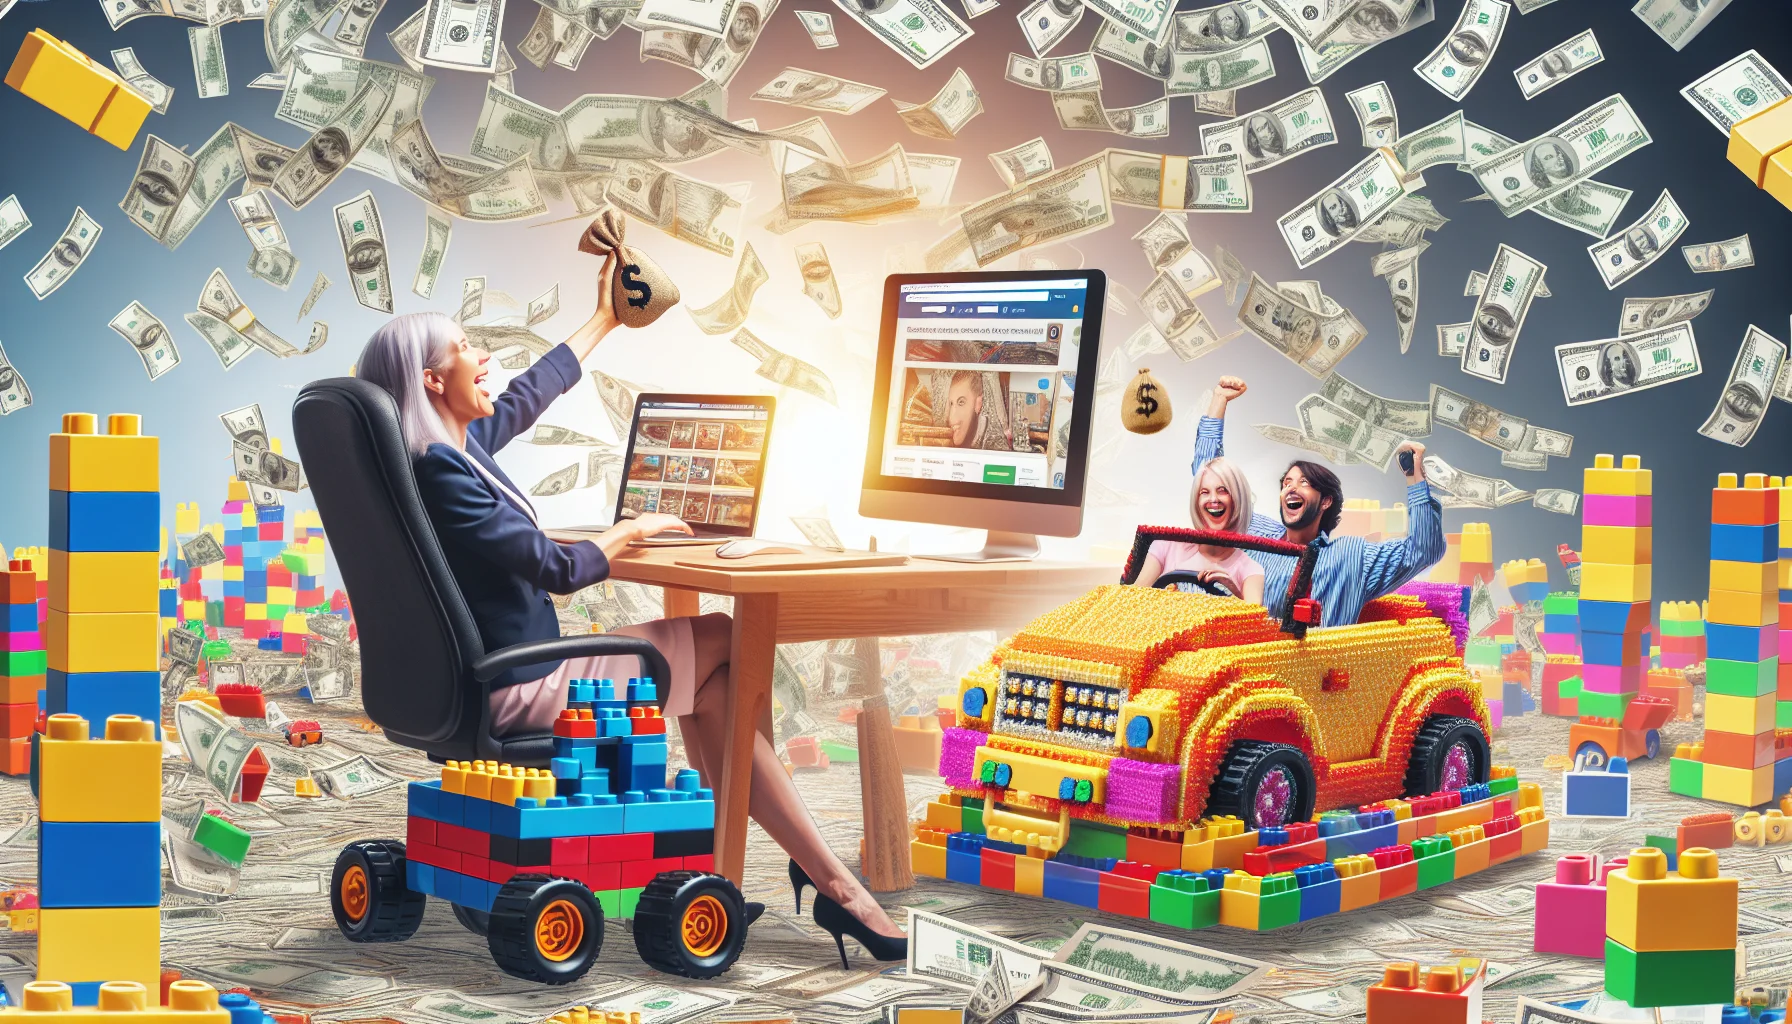 Generate a humorous image that playfully illustrates the concept of making money online through a block toy affiliate program. The scenery can be an imaginative interpretation of the internet world, with vibrant images of computer devices, websites, and block toys. Picture a Caucasian female at a computer desk flooded with stacks of dollar bills, visually highlighting the profitable aspect. Further, depict a Hispanic male driving a block toy car filled with gold coins, embodying the idea of wealth gained through an affiliation program. Imbue the entire scene with an enticing, yet light-hearted appeal.